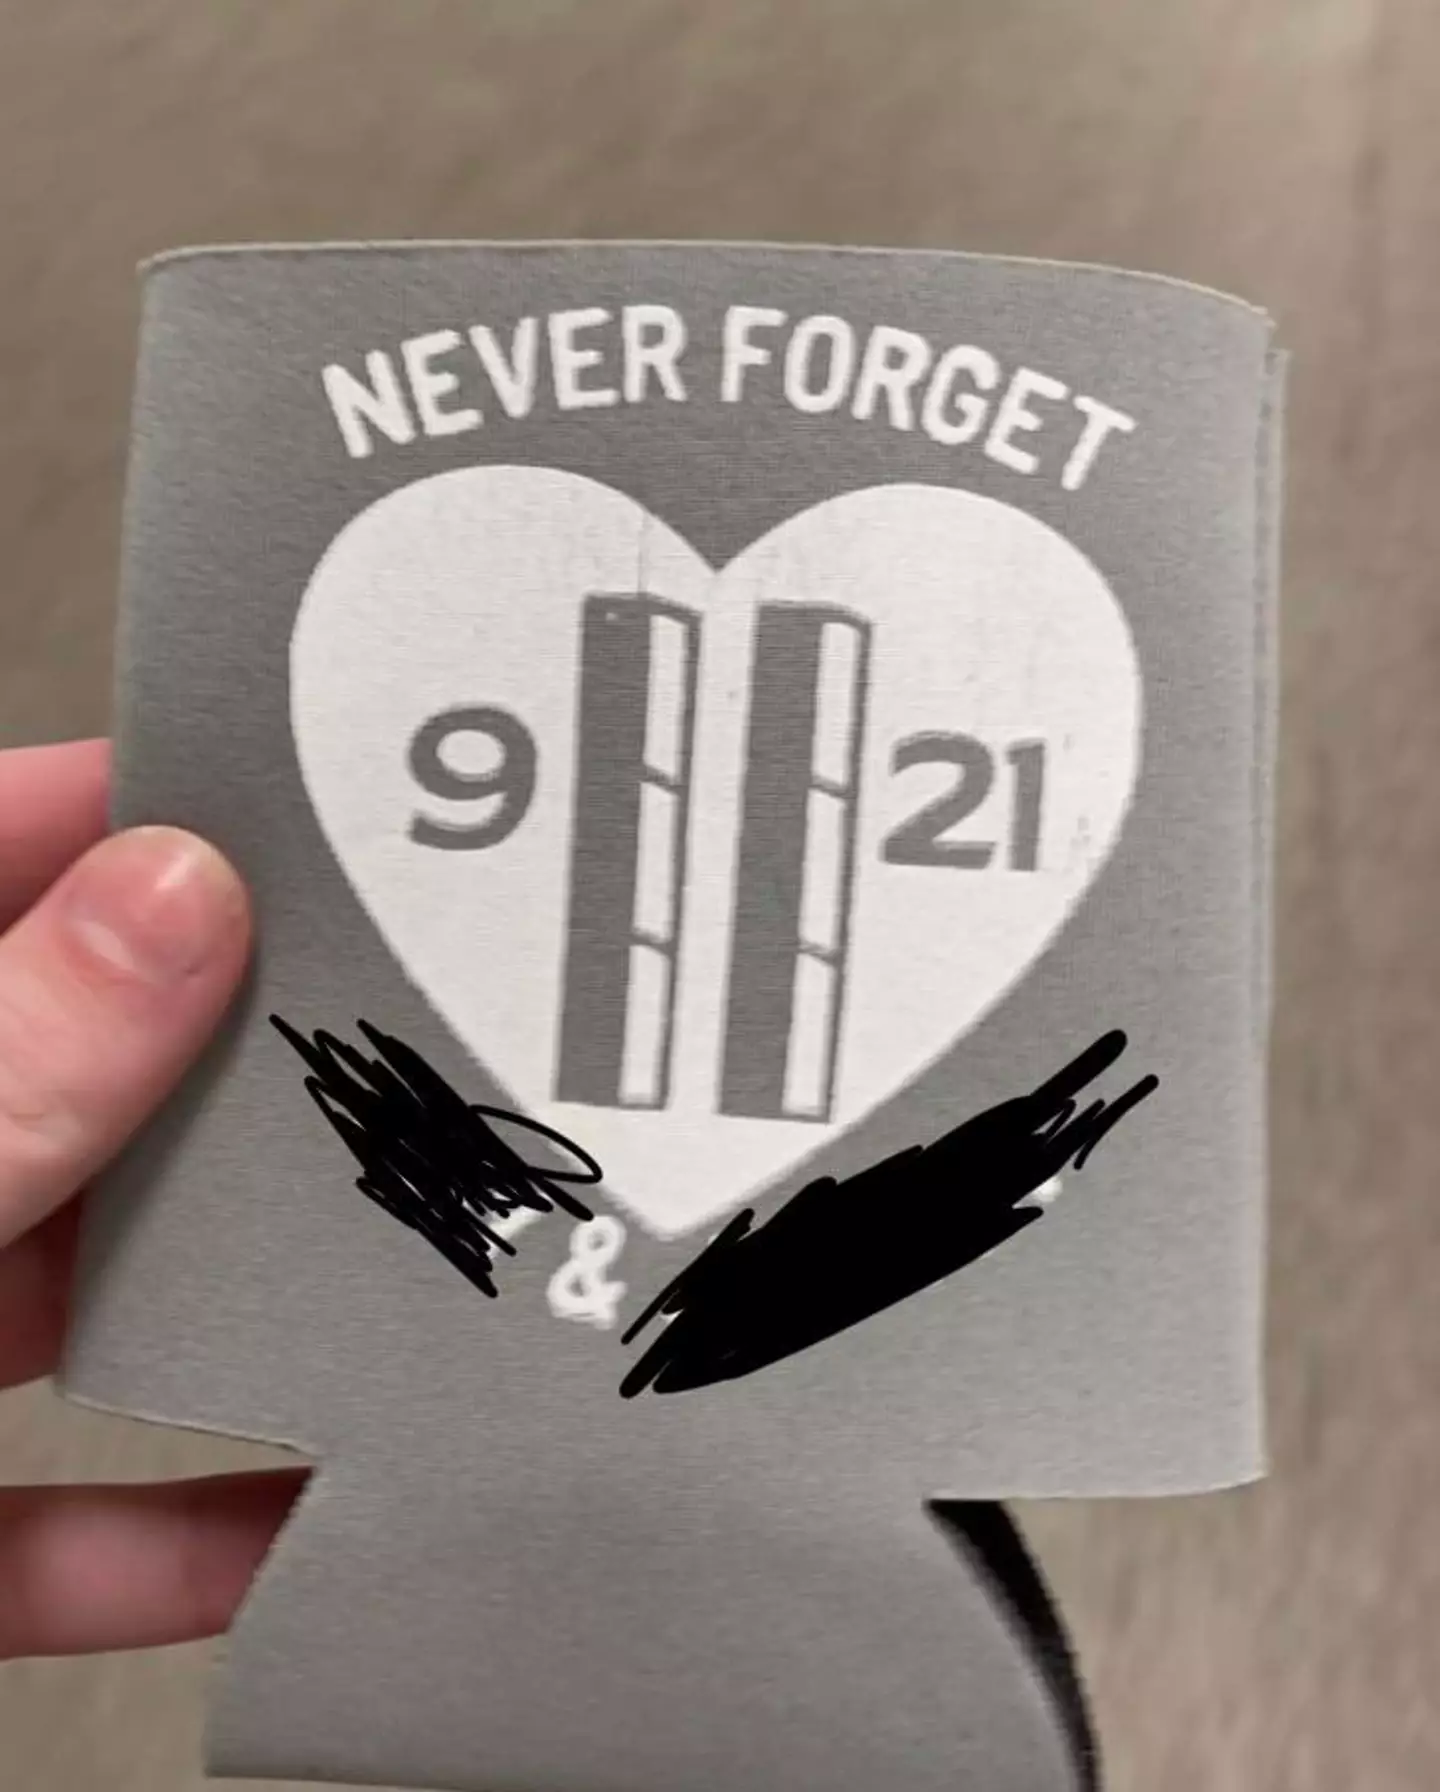 The invites use the twin towers instead of an '11'. (